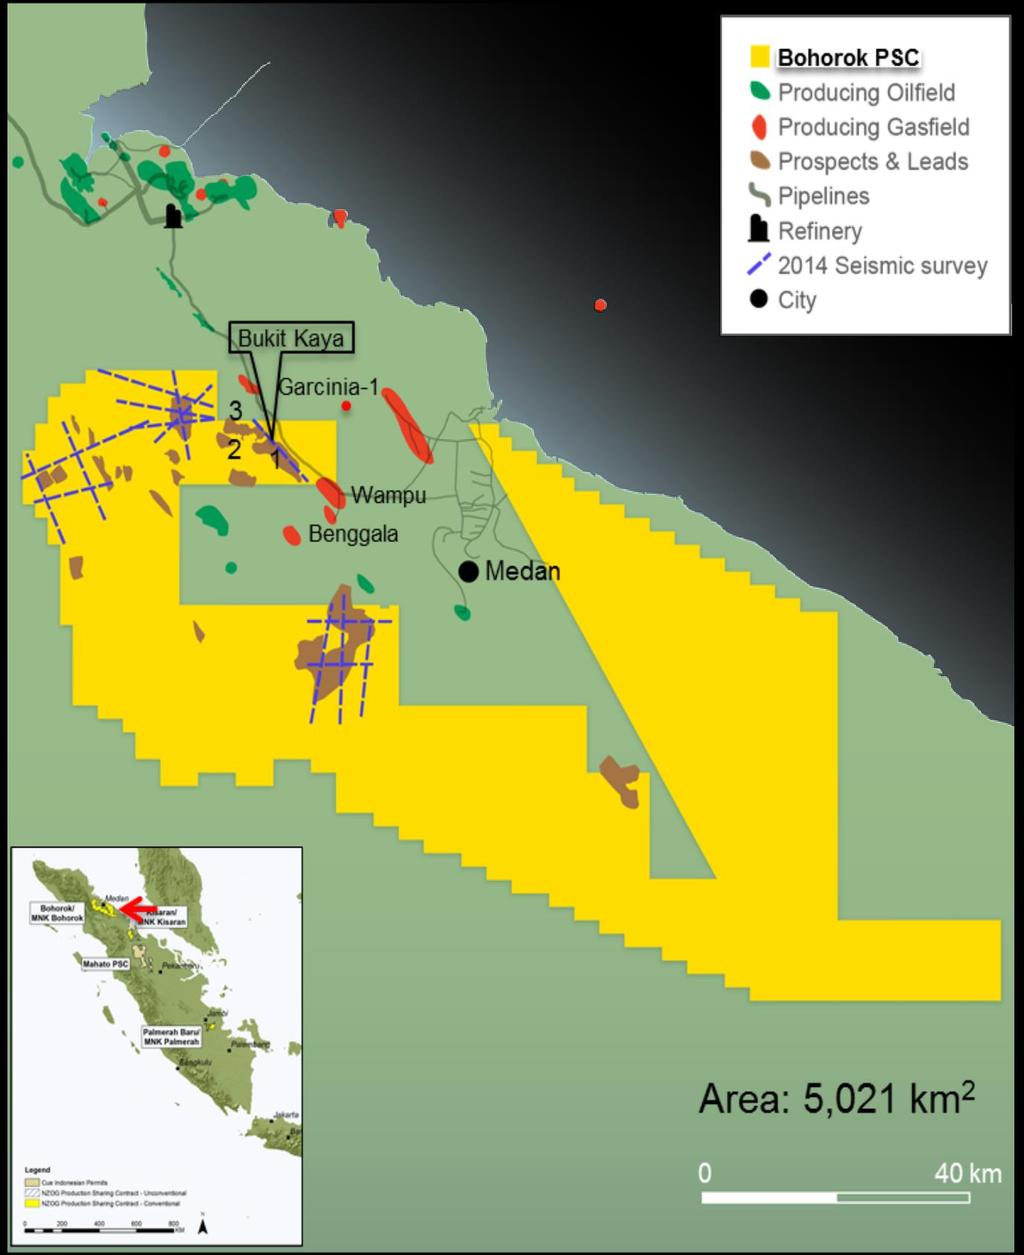 Conventional Borohok PSC Prospects 13.99 mmboe of Net, Unrisked Prospective Resources The Bohorok PSC is located onshore in the North Sumatra Basin, one of the most prolific basins in Indonesia.